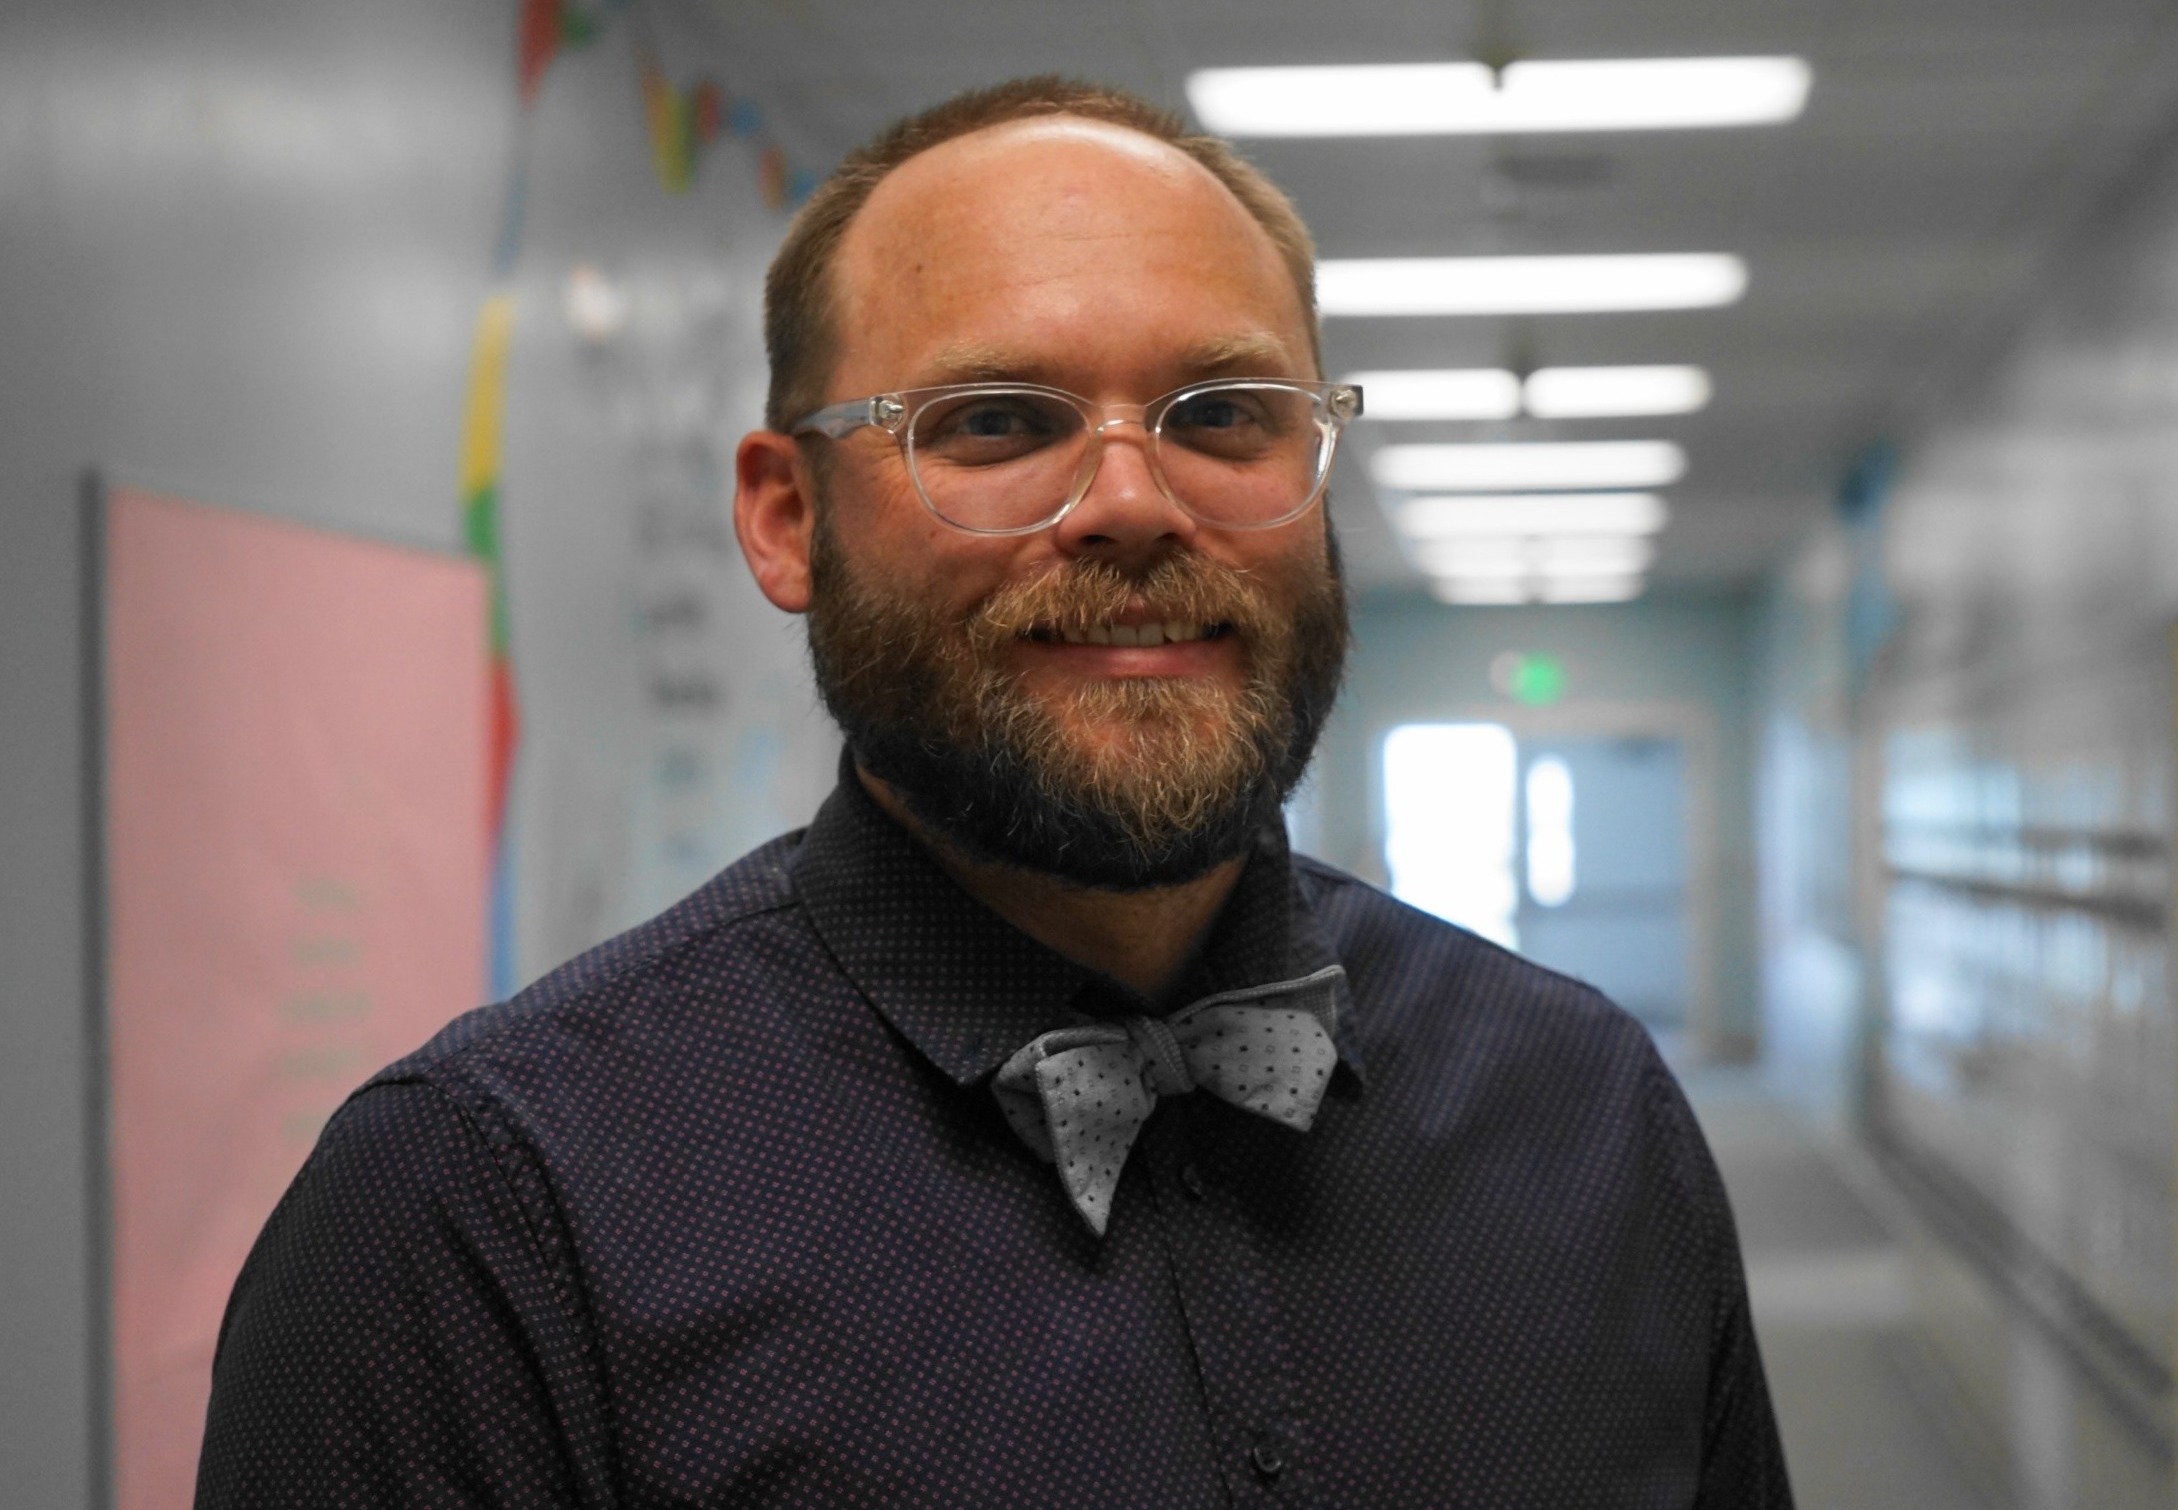 Chugwater, WY public school is now charter: bearded man with glasses and bowtie stands and smiles in school hallway